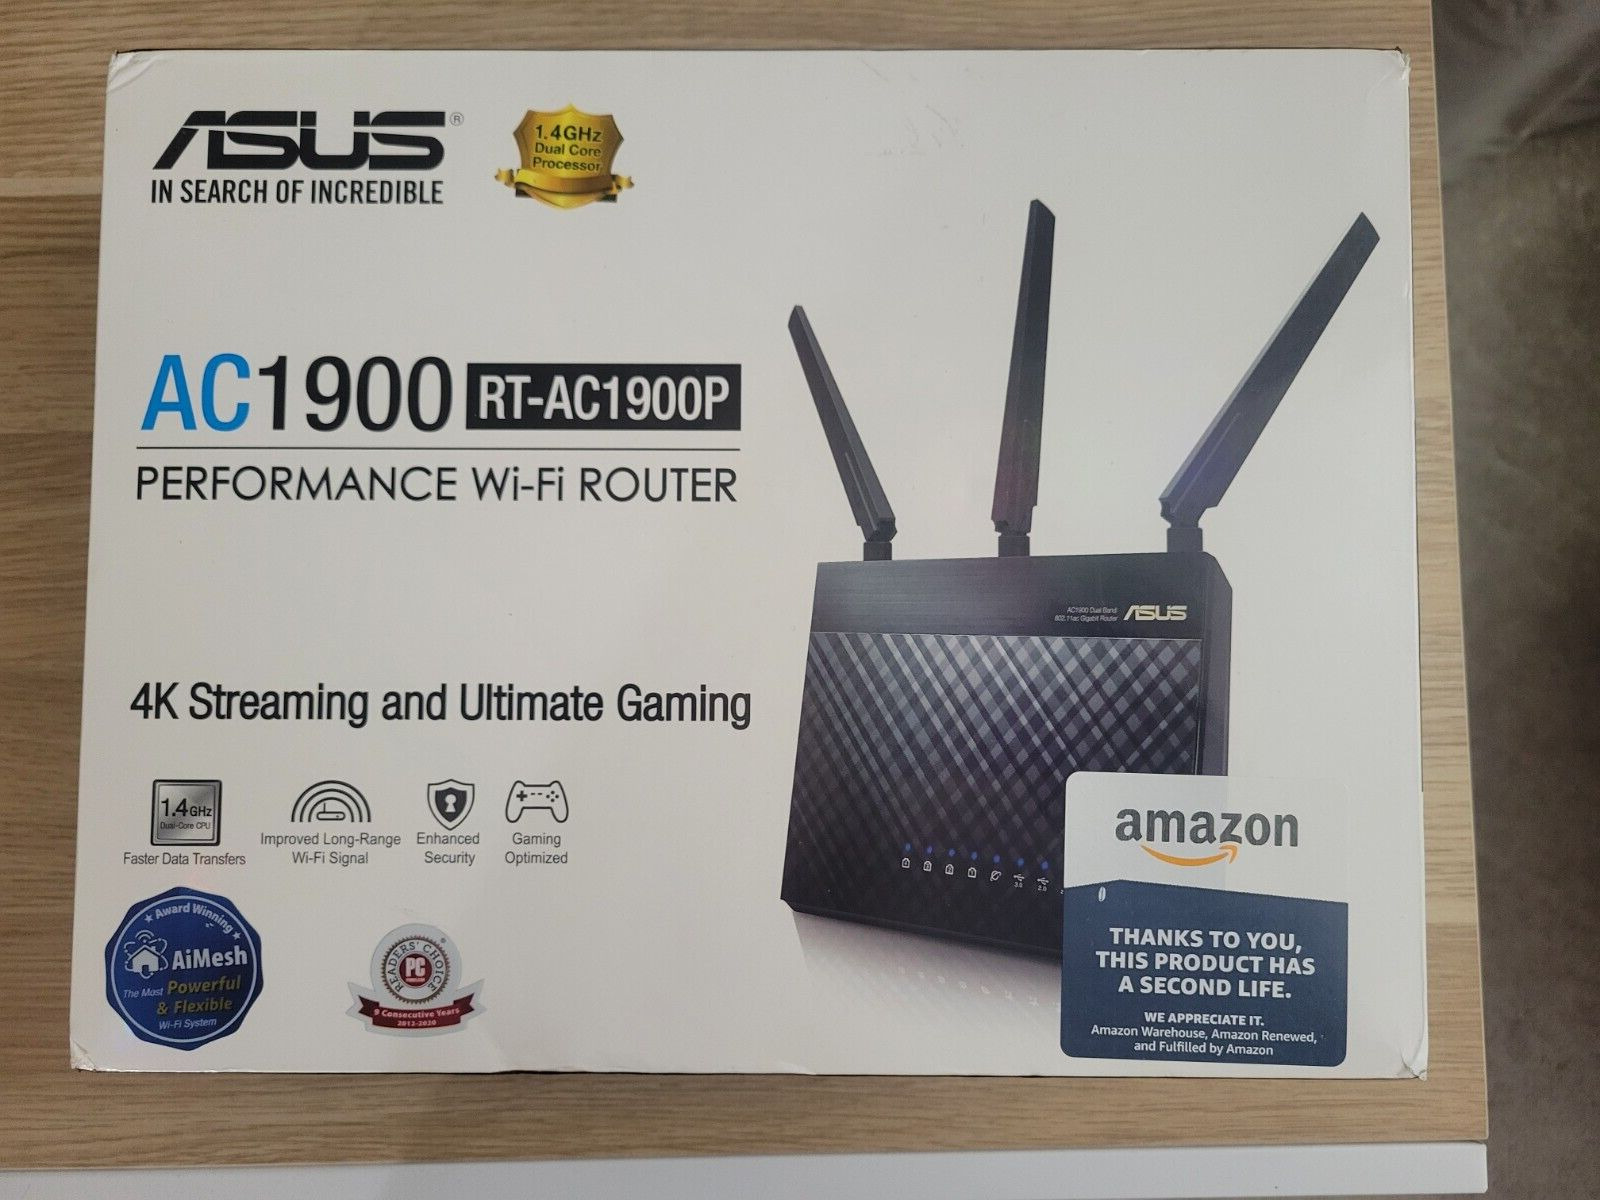 Asus RT-AC1900P Dual Band 802.11ac Wi-Fi Gigabit Wireless Router with AI Mesh